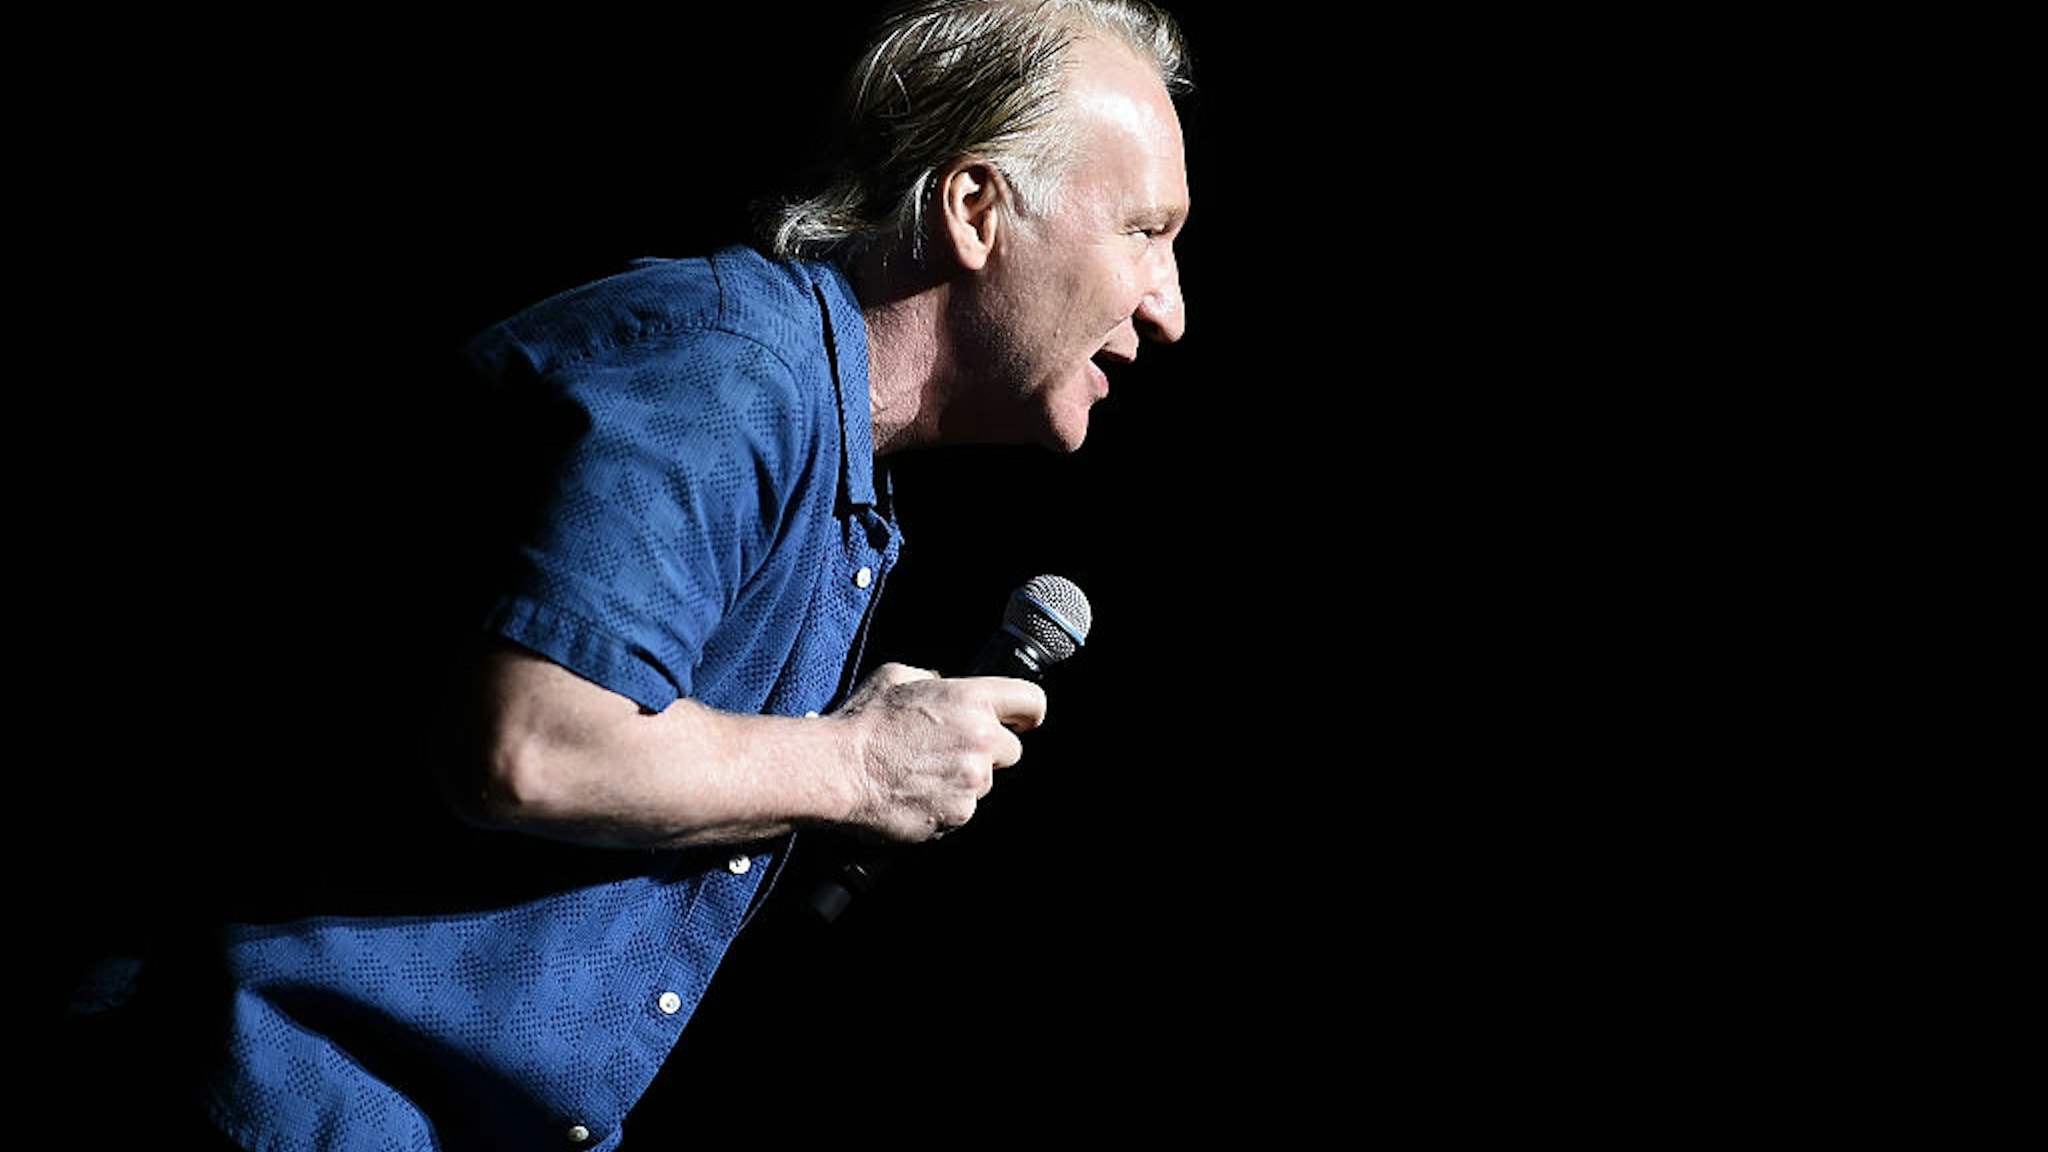 NEW YORK, NY - NOVEMBER 05: Bill Maher Performs During New York Comedy Festival at The Theater at Madison Square Garden on November 5, 2016 in New York City.